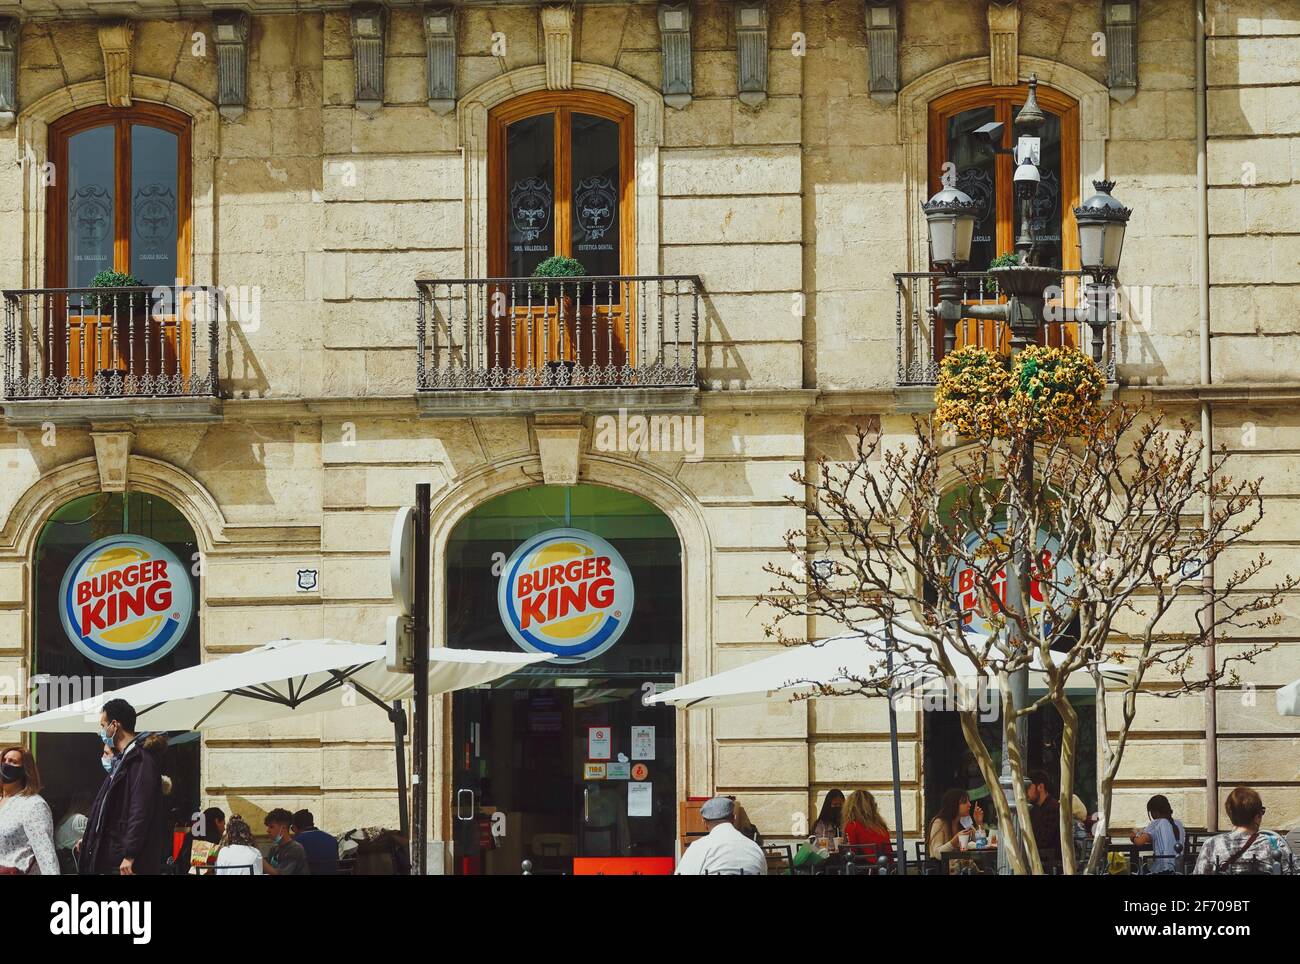 Burger King restaurant in a historic building in the center of Granada (Spain) with people eating at their outside tables, a sunny spring day Stock Photo